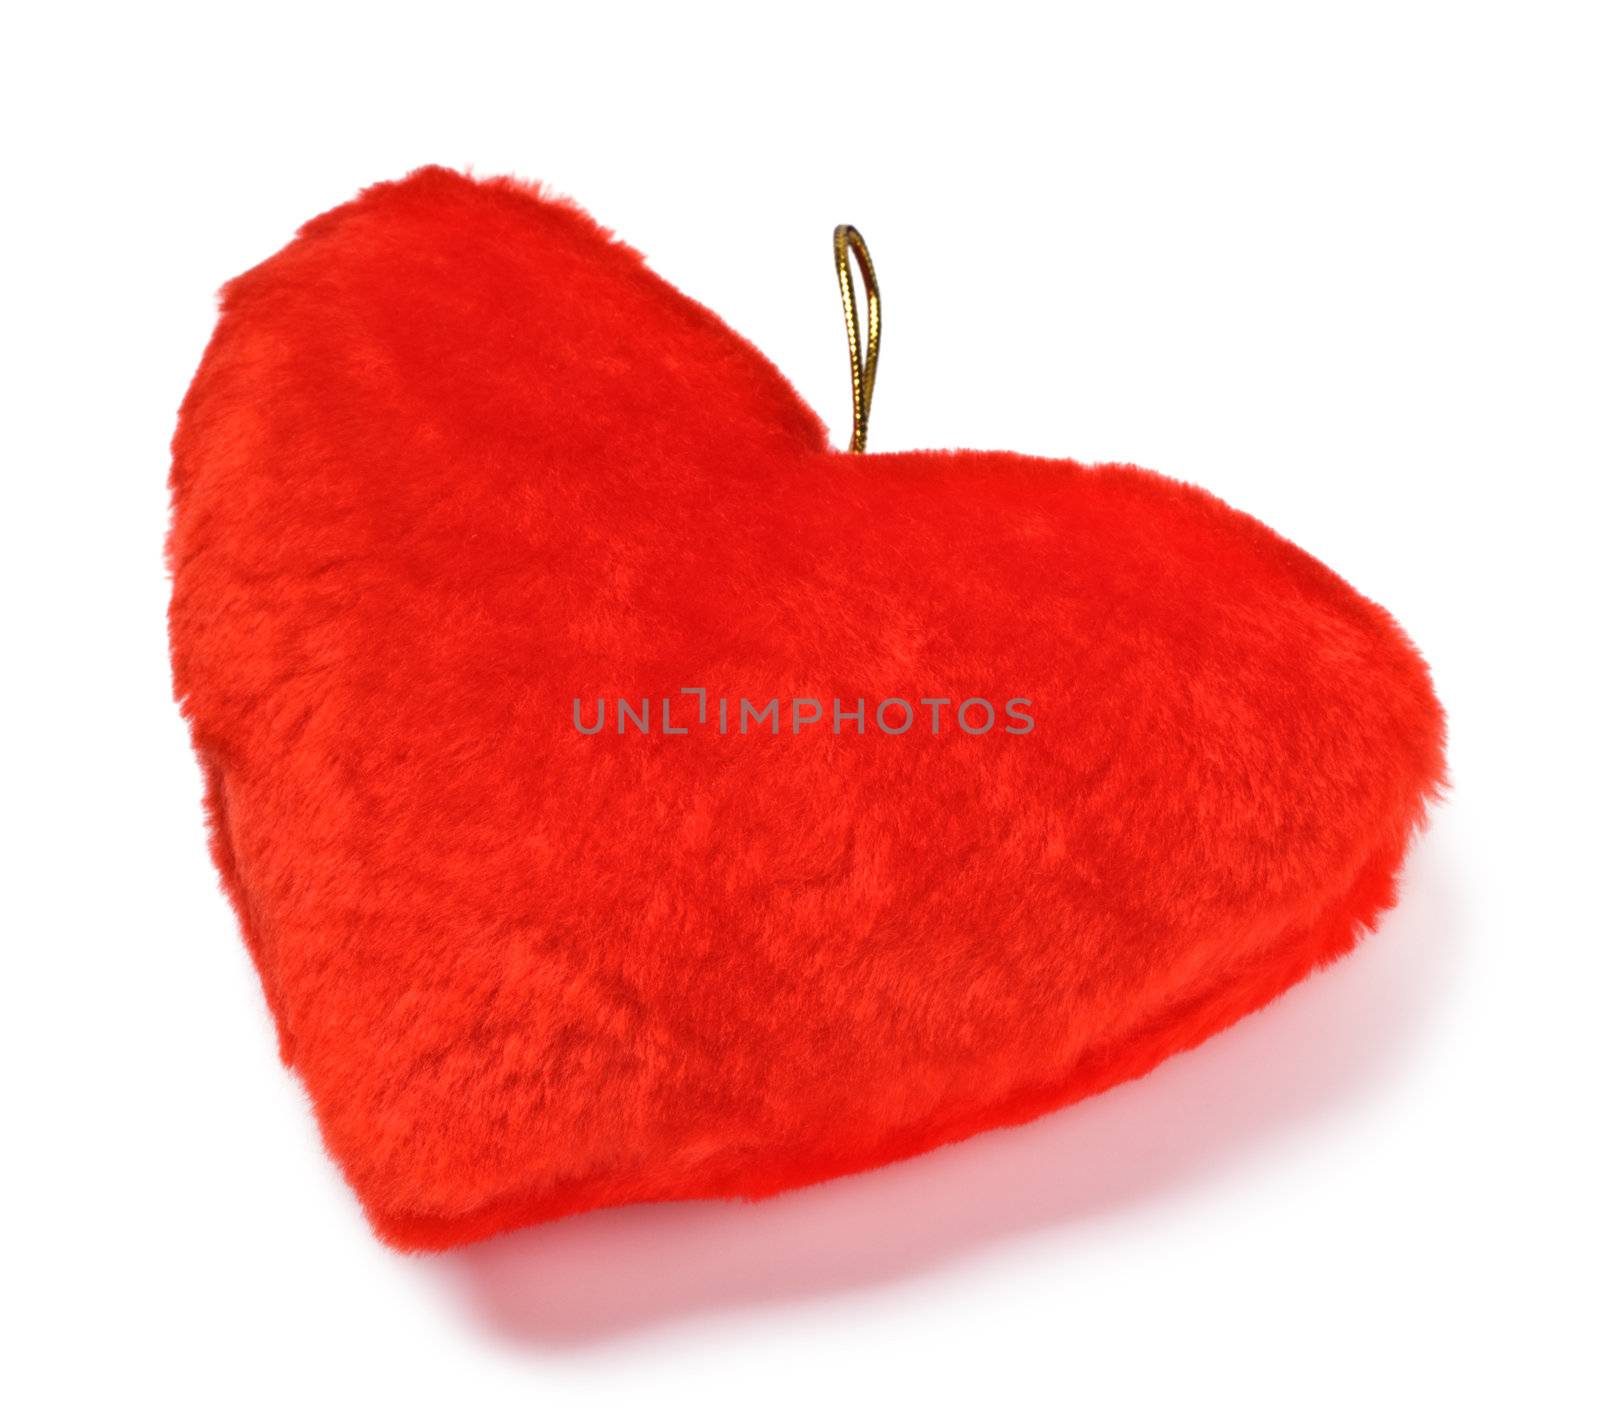 red heart shaped pillow isolated on white